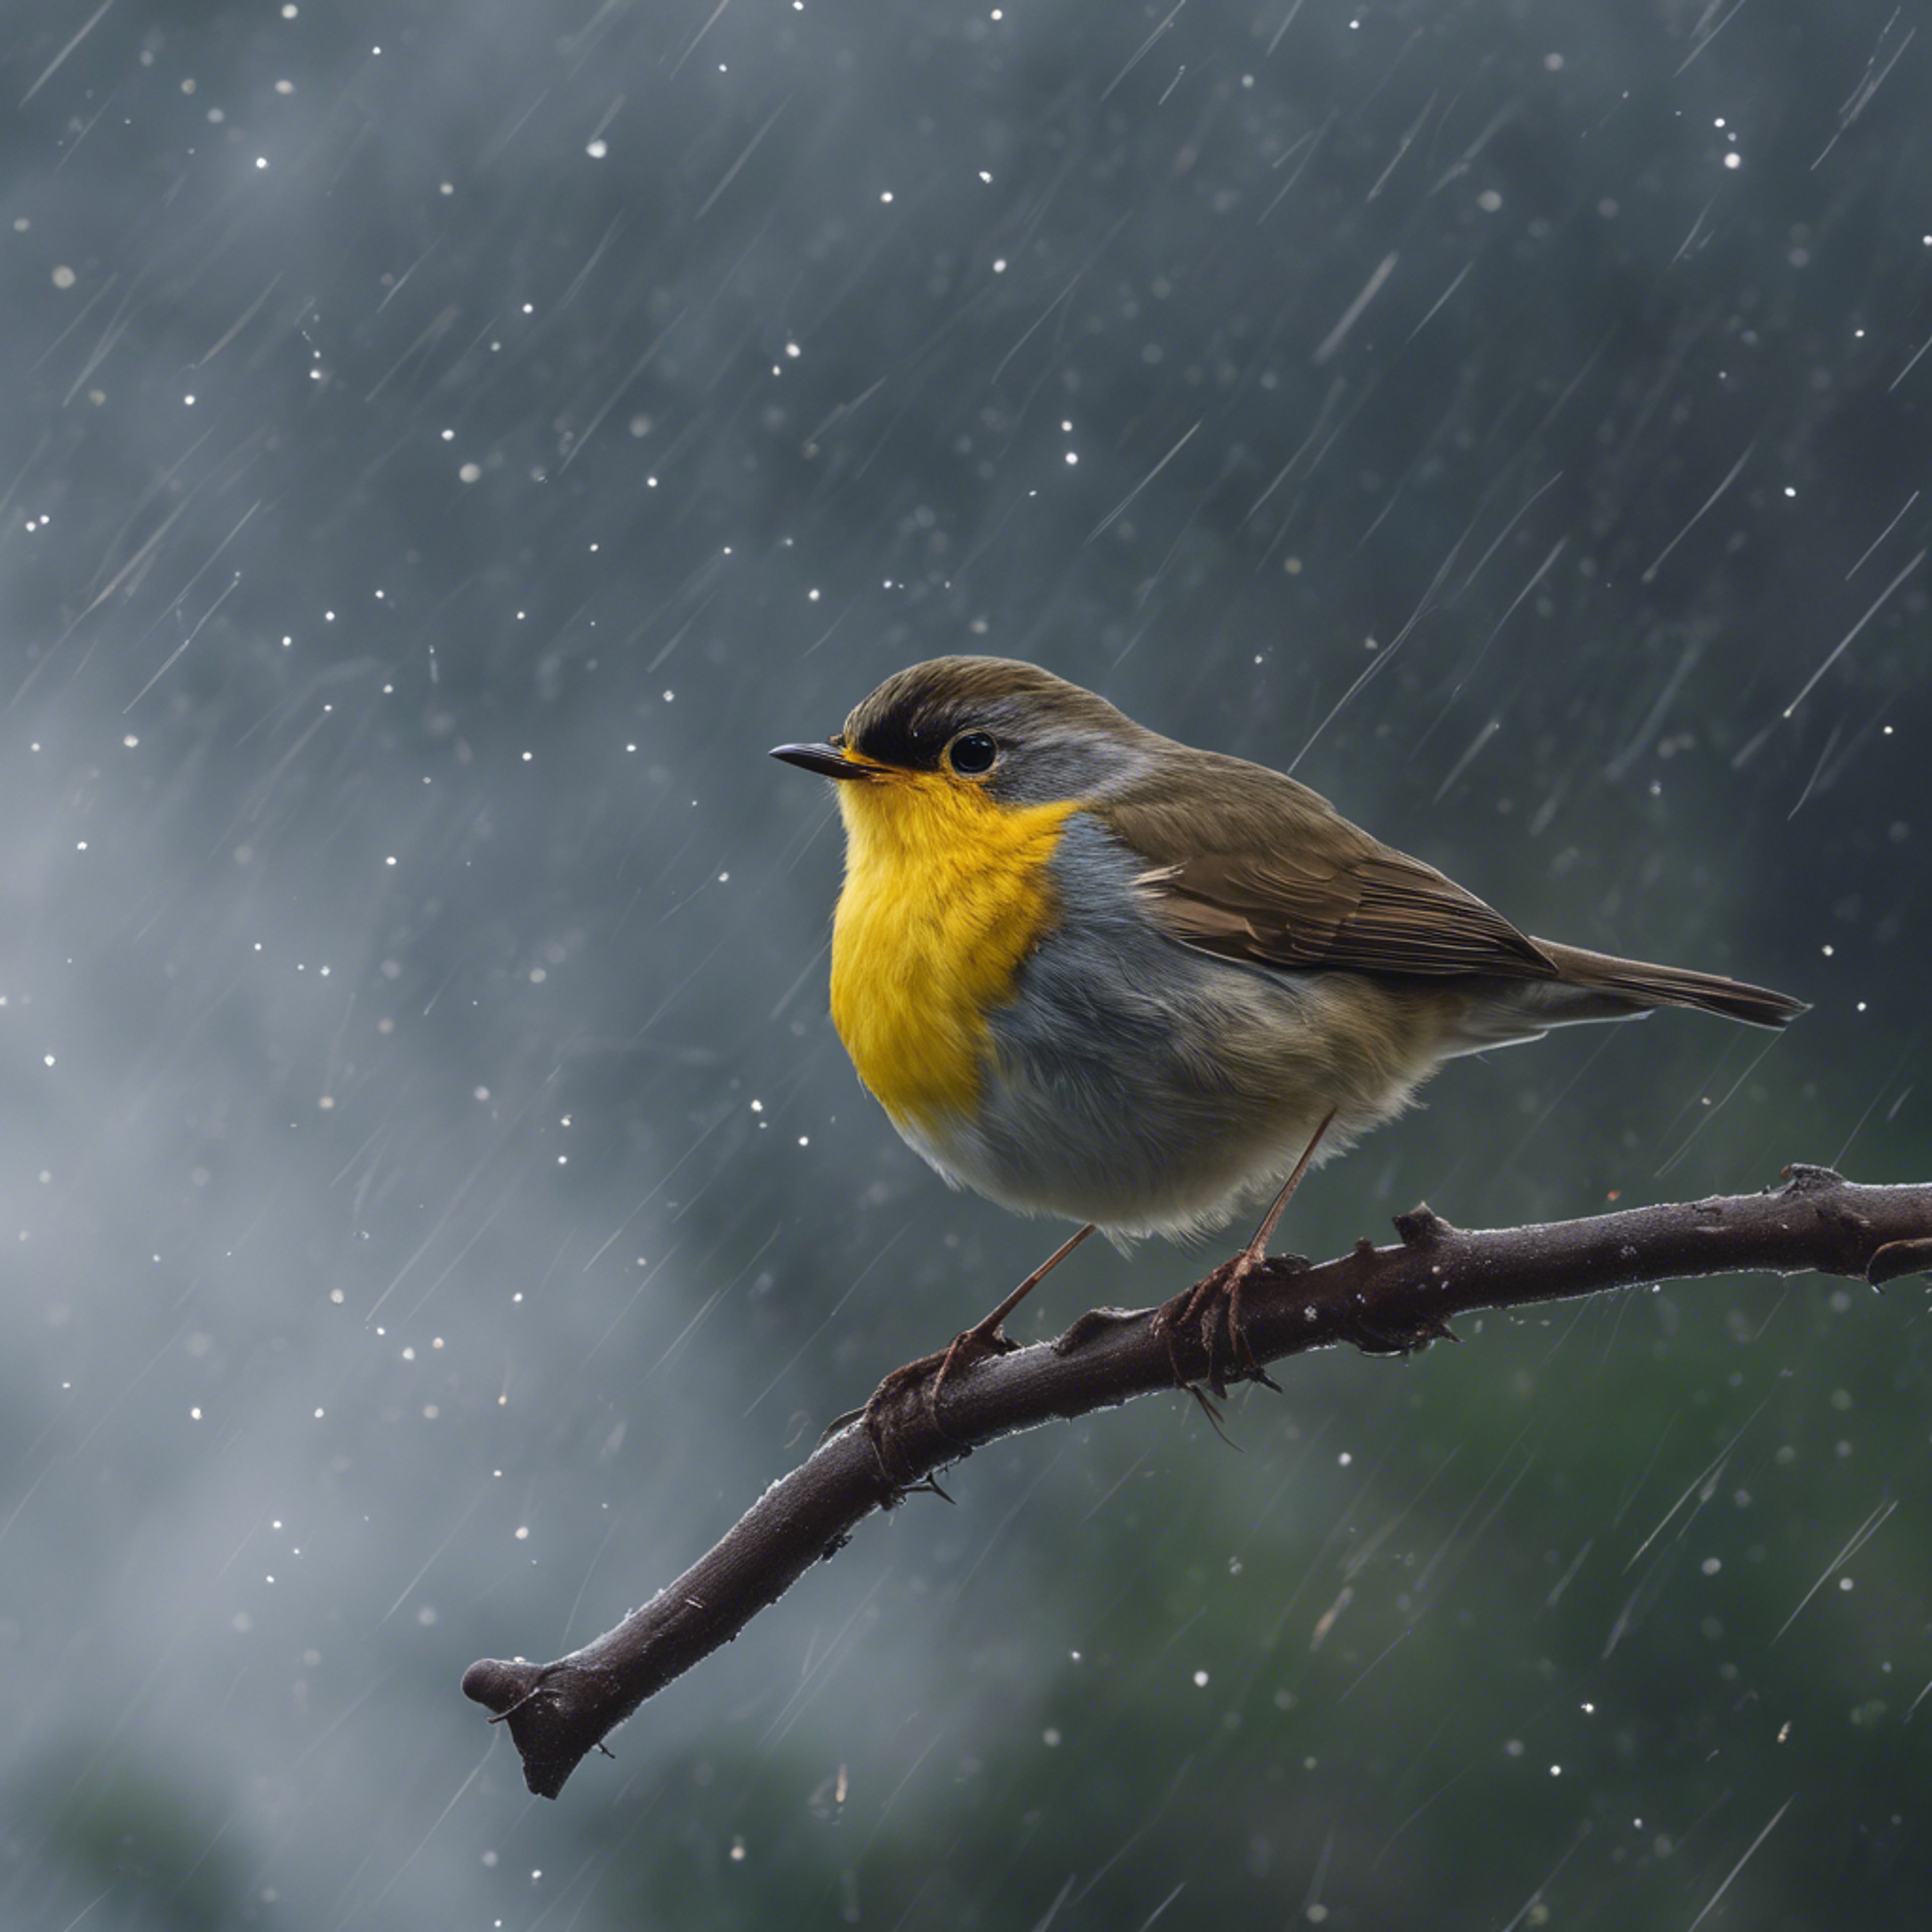 A yellow-breasted robin in mid-flight against a dark, stormy sky. Wallpaper[14716aee78274faeac04]